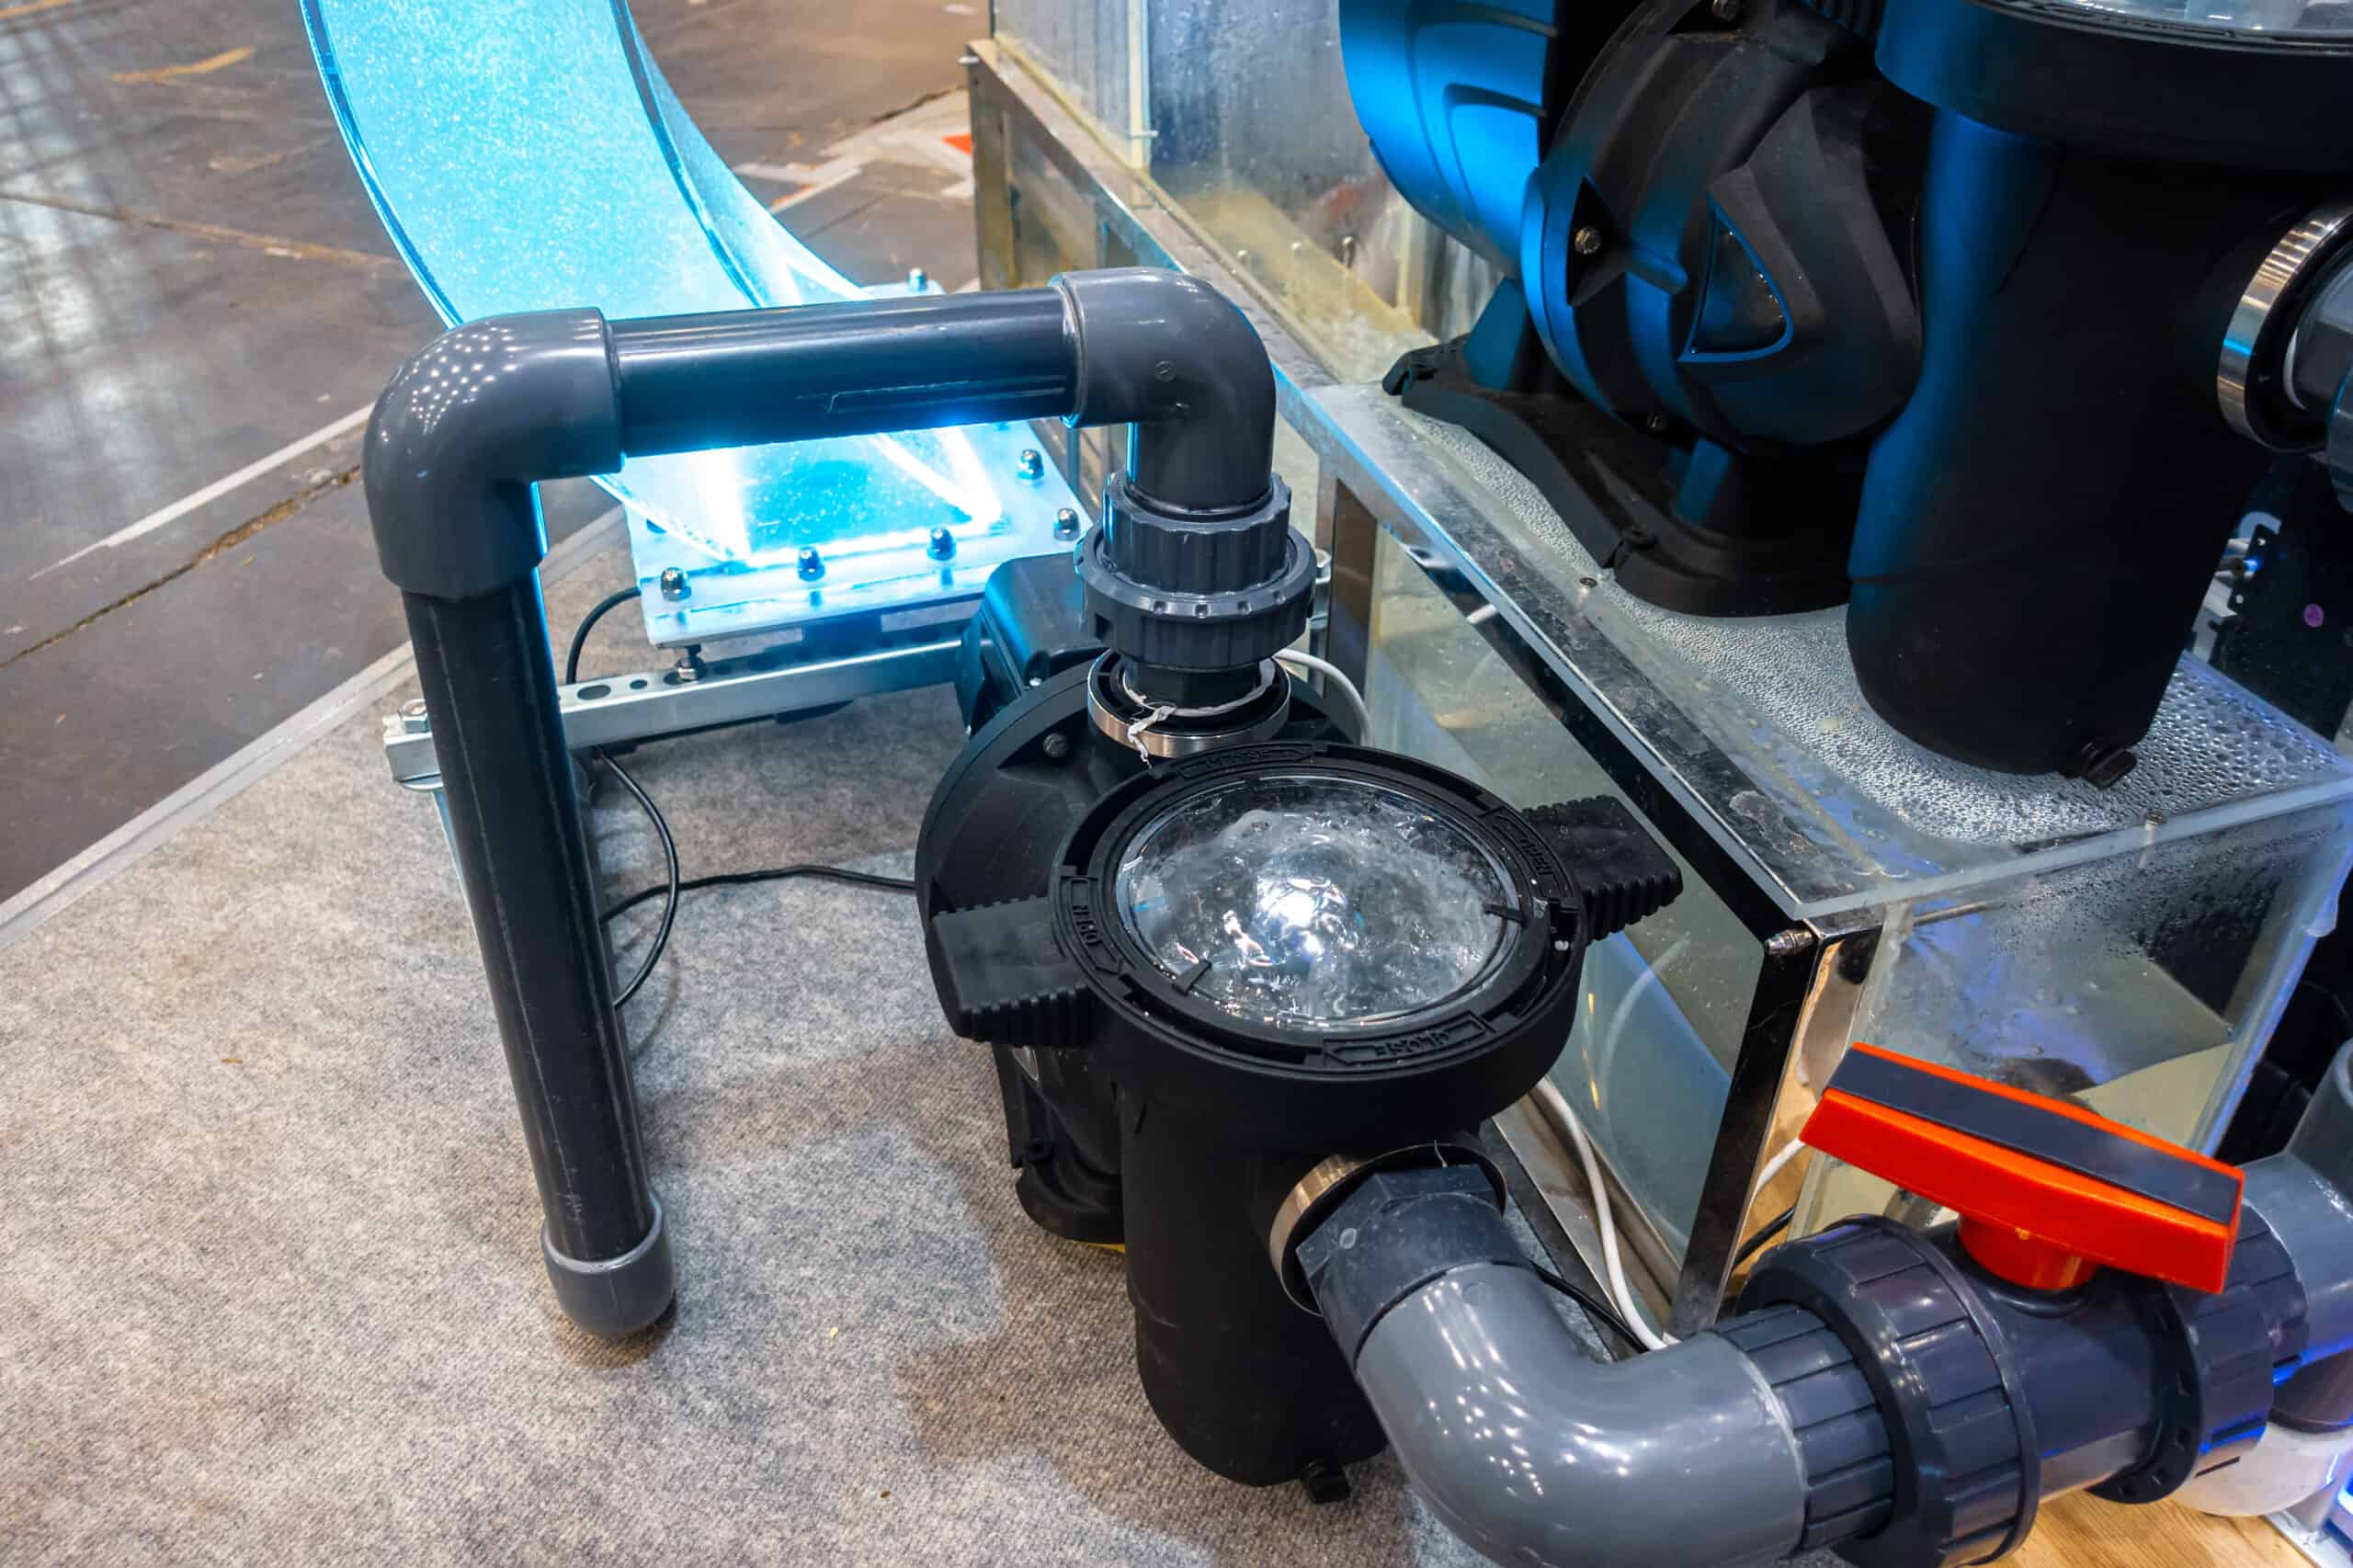 Is It Better To Run A Pool Pump At Night Or Day?